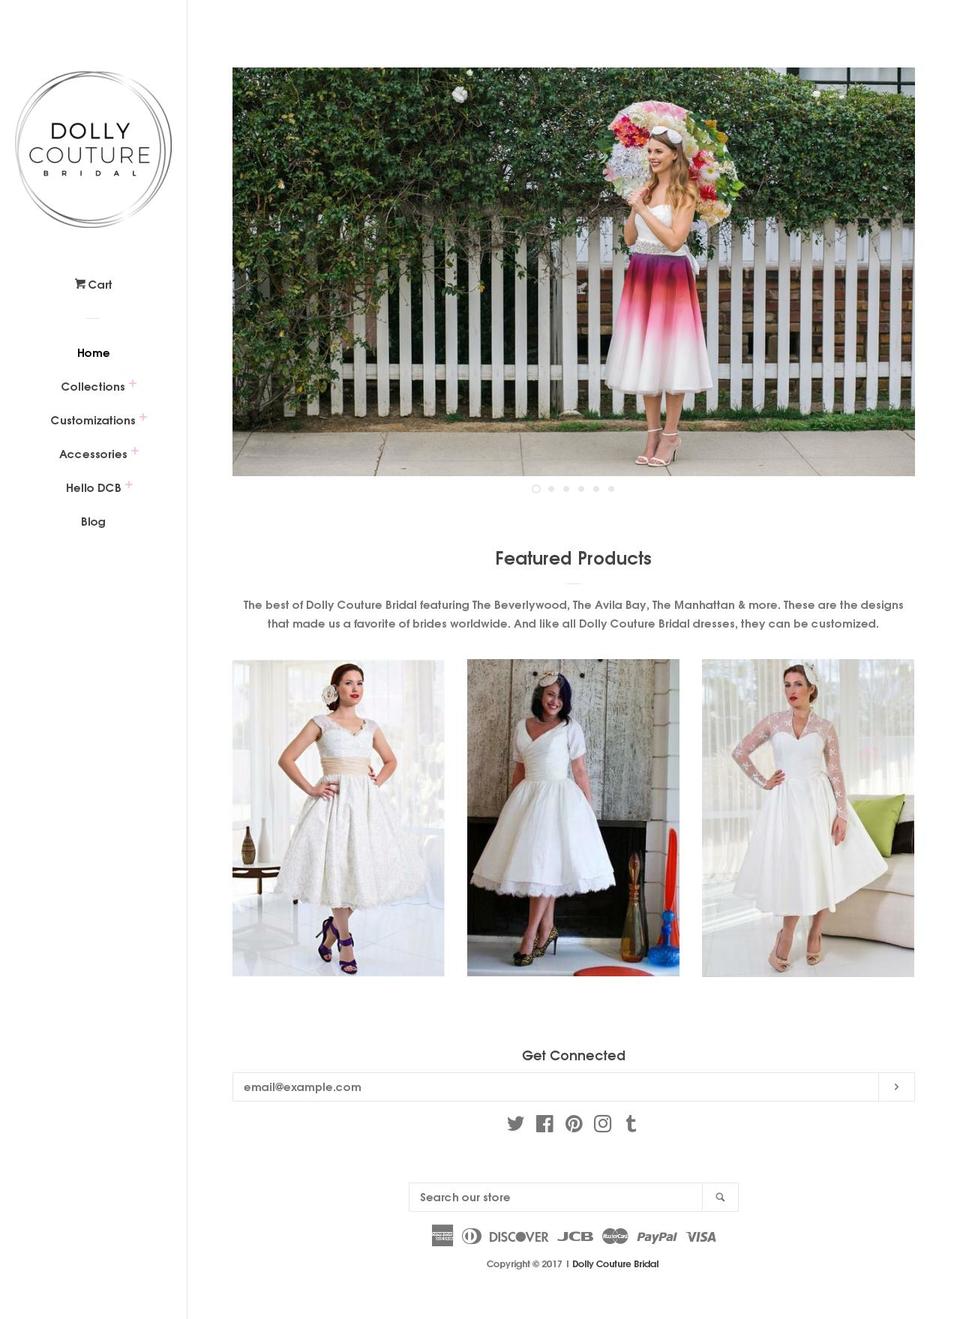 Pop Shopify theme site example dollycouture.com